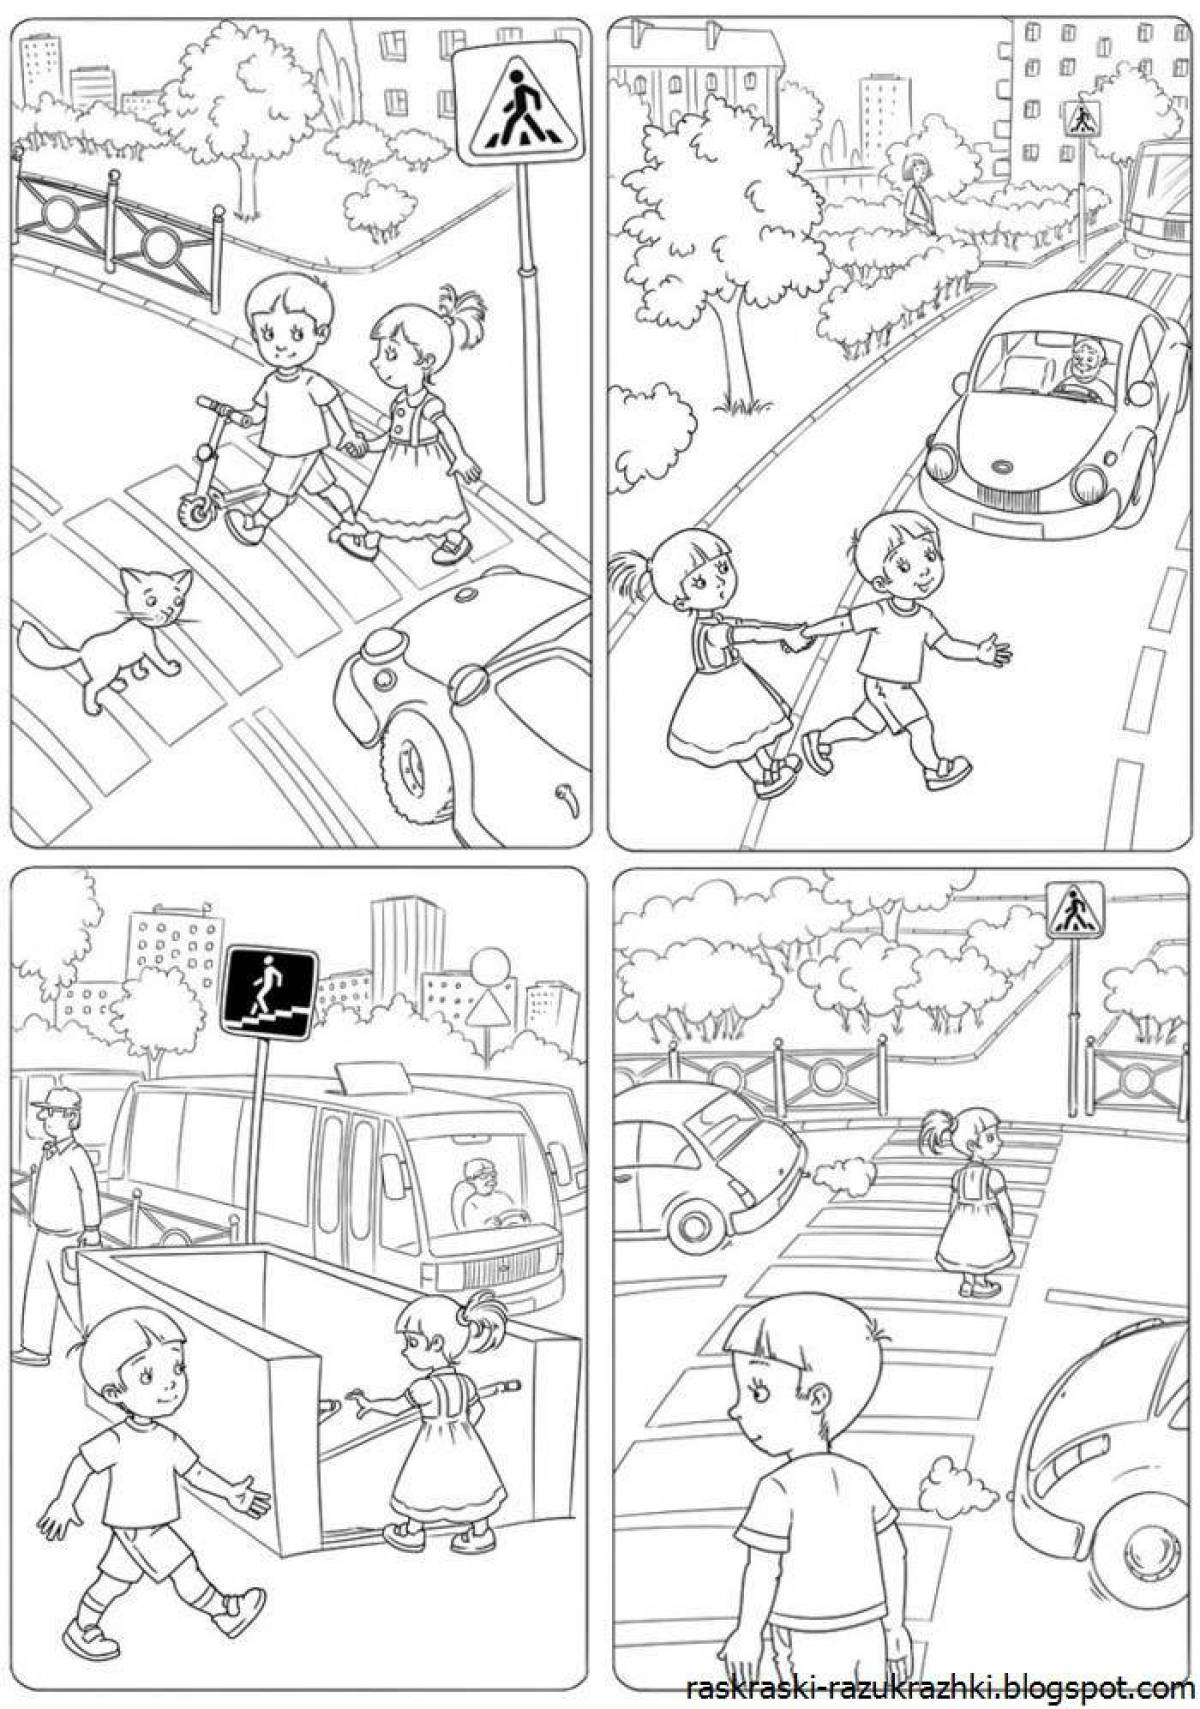 A fun coloring book of the rules of the road for preschoolers